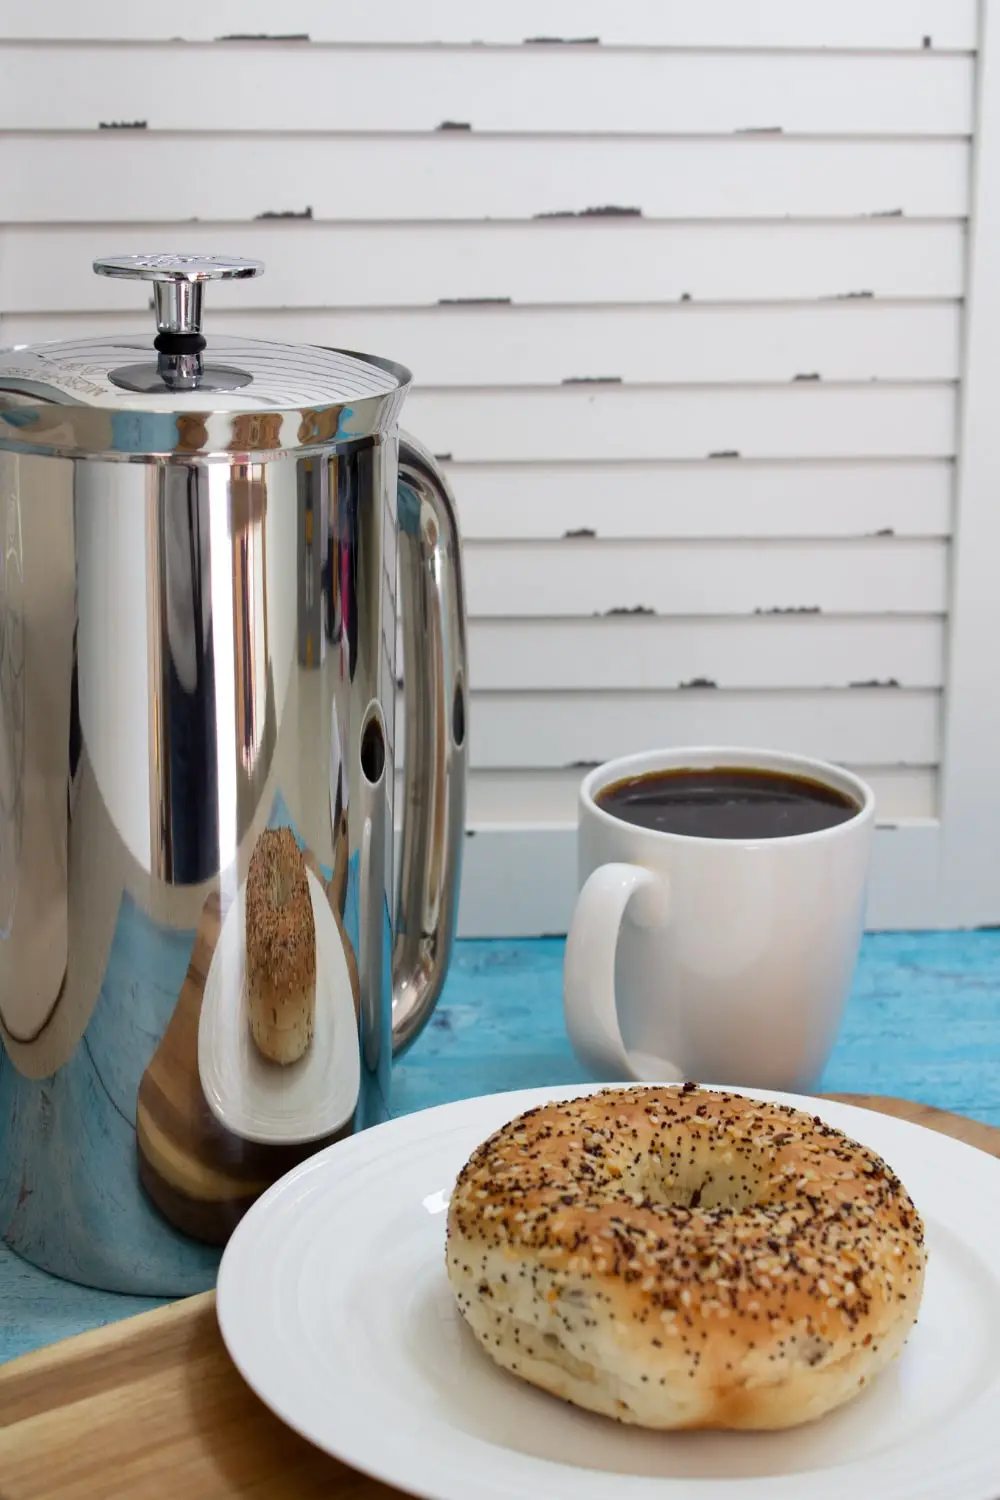 Take Your Coffee To The Next Level With ESPRO French Presses